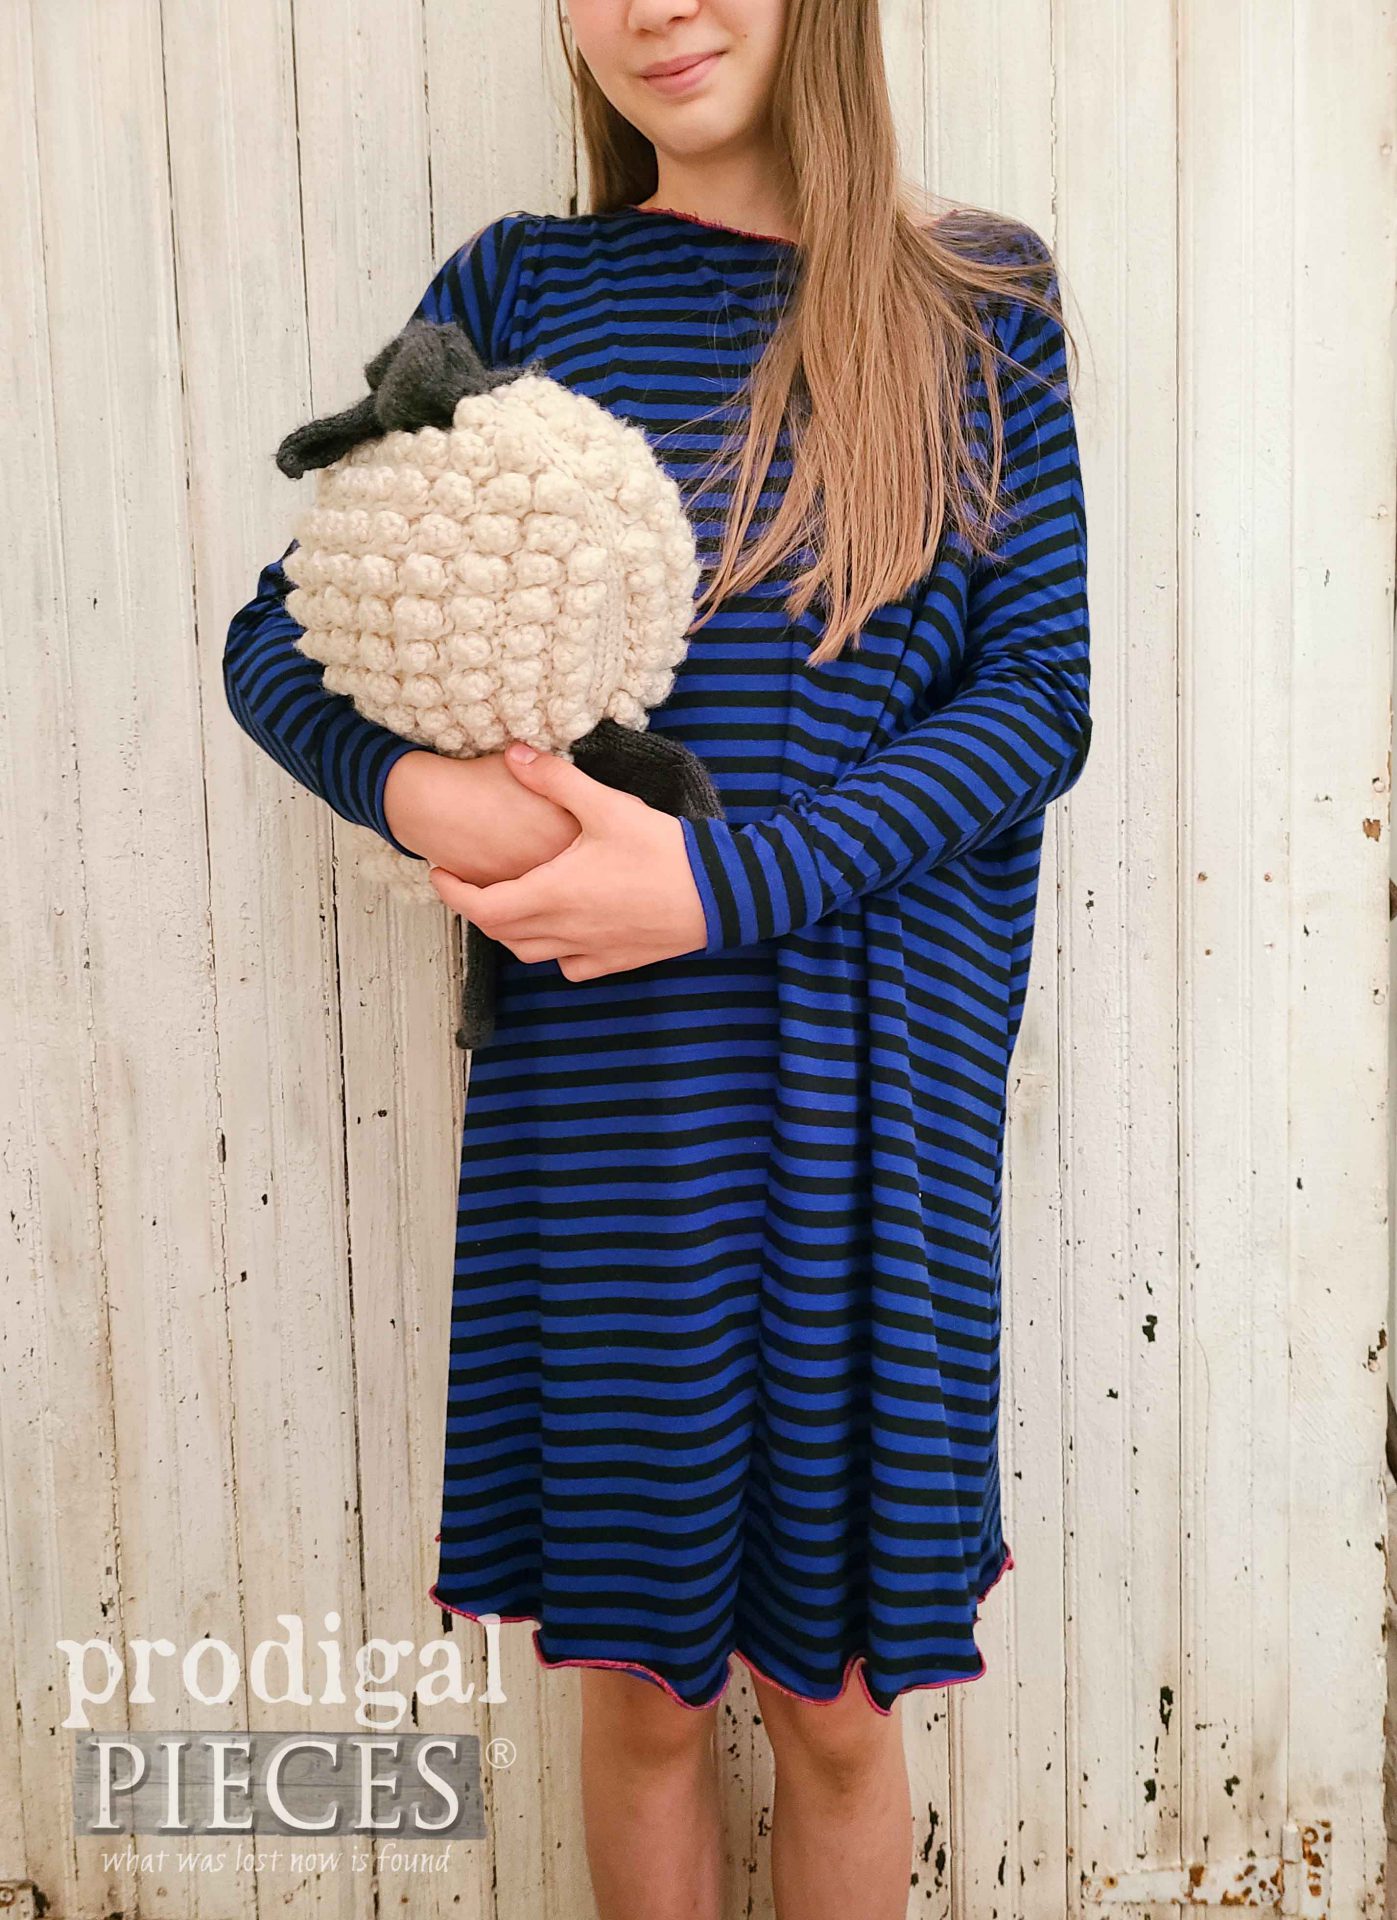 Long Sleeve Stripe Nightgown from Upcycled Skirt by Larissa of Prodigal Pieces | prodigalpieces.com #prodigalpieces #sewing #fashion #handmade #upcycled